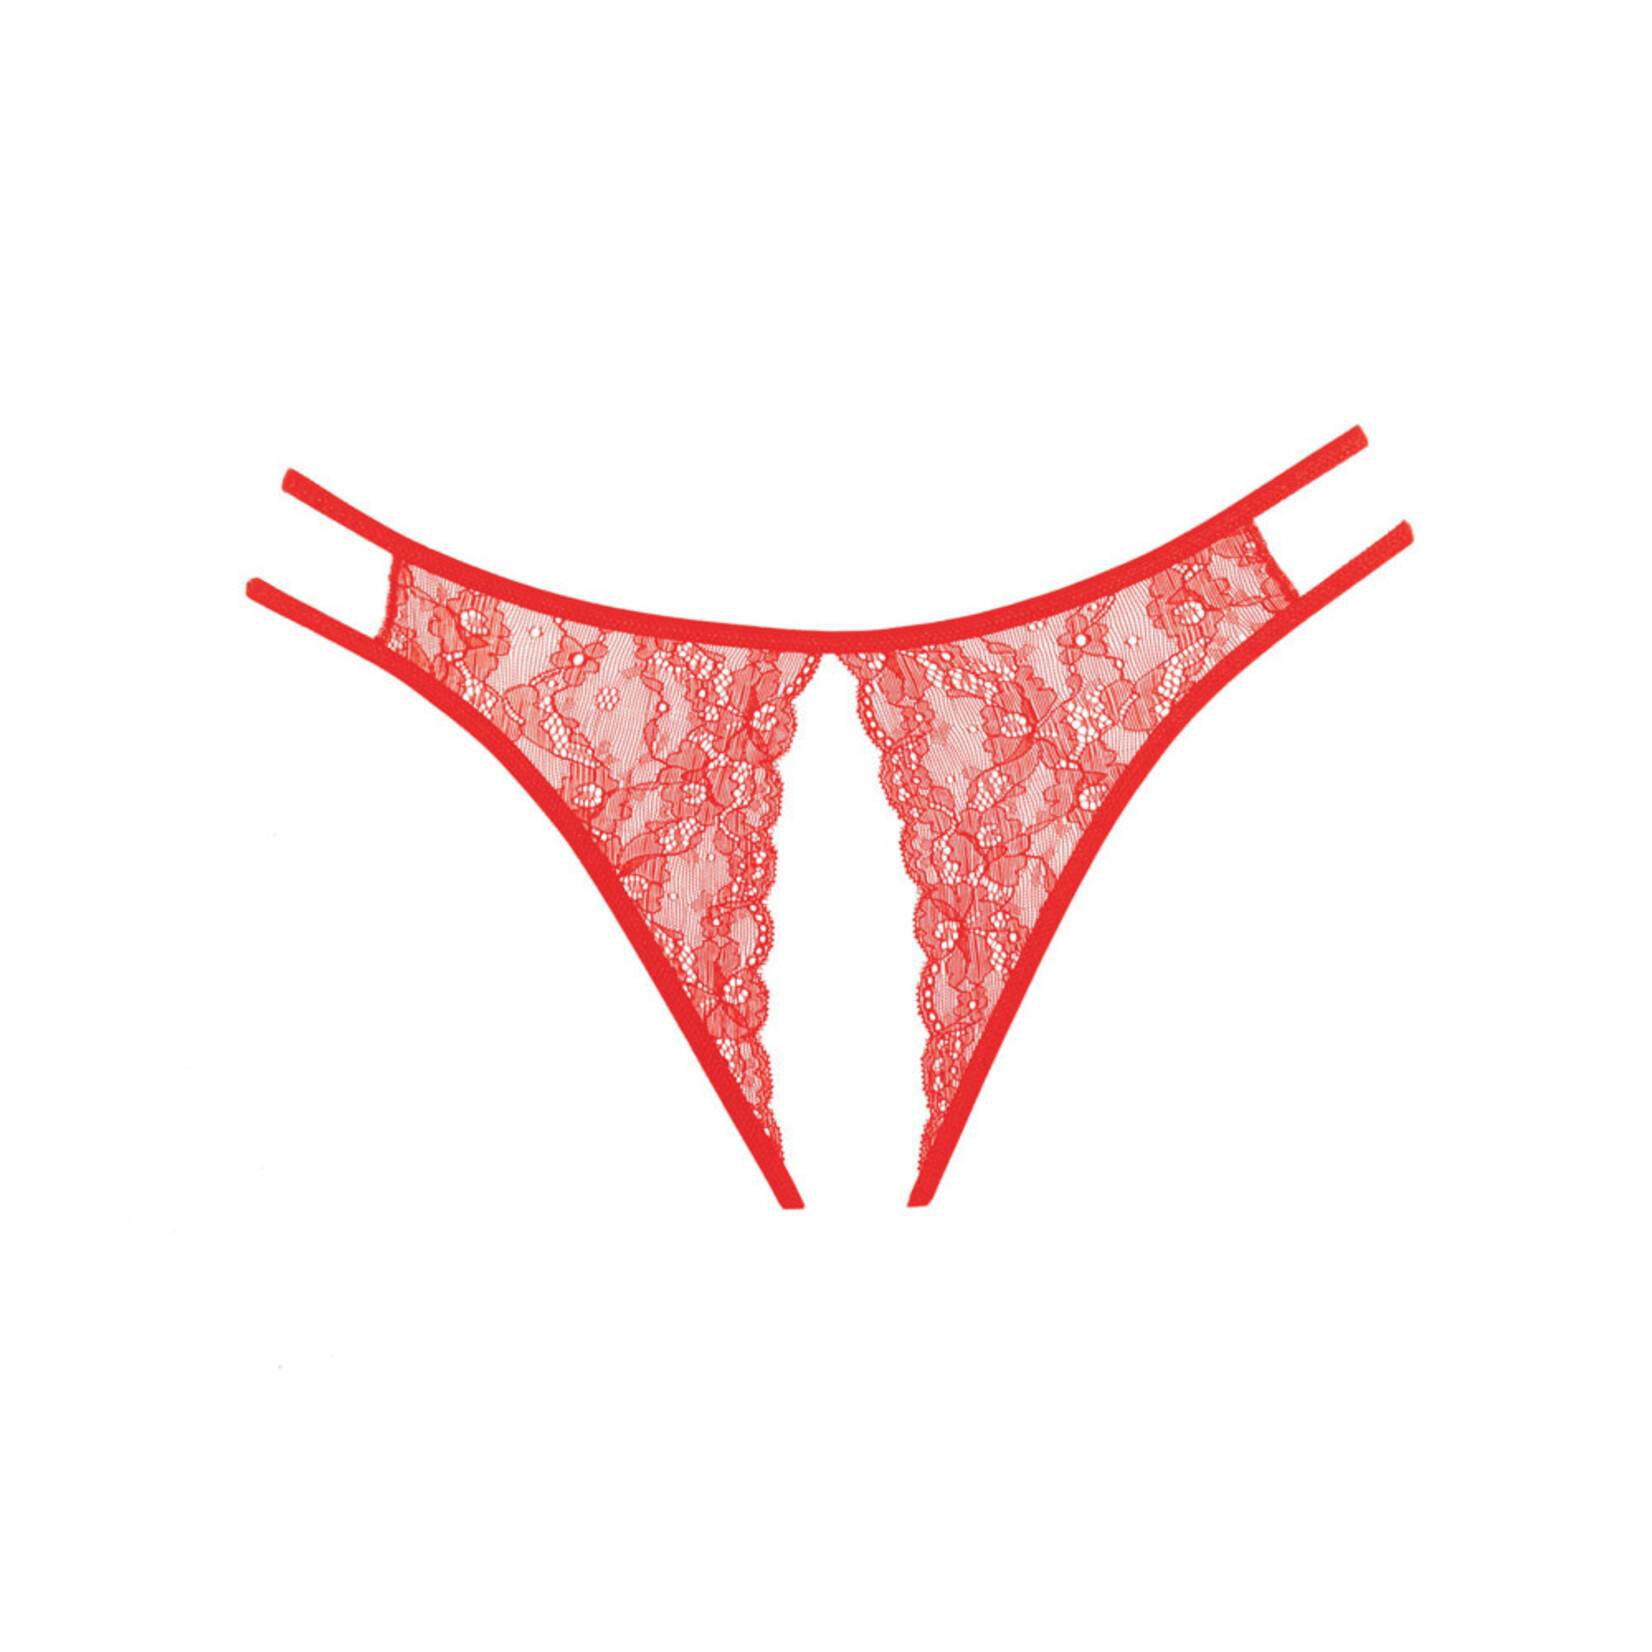 ALLURE LINGERIE ALLURE ADORE - CROTCHLESS SCALLOPED LACE HONEY PANTY - RED